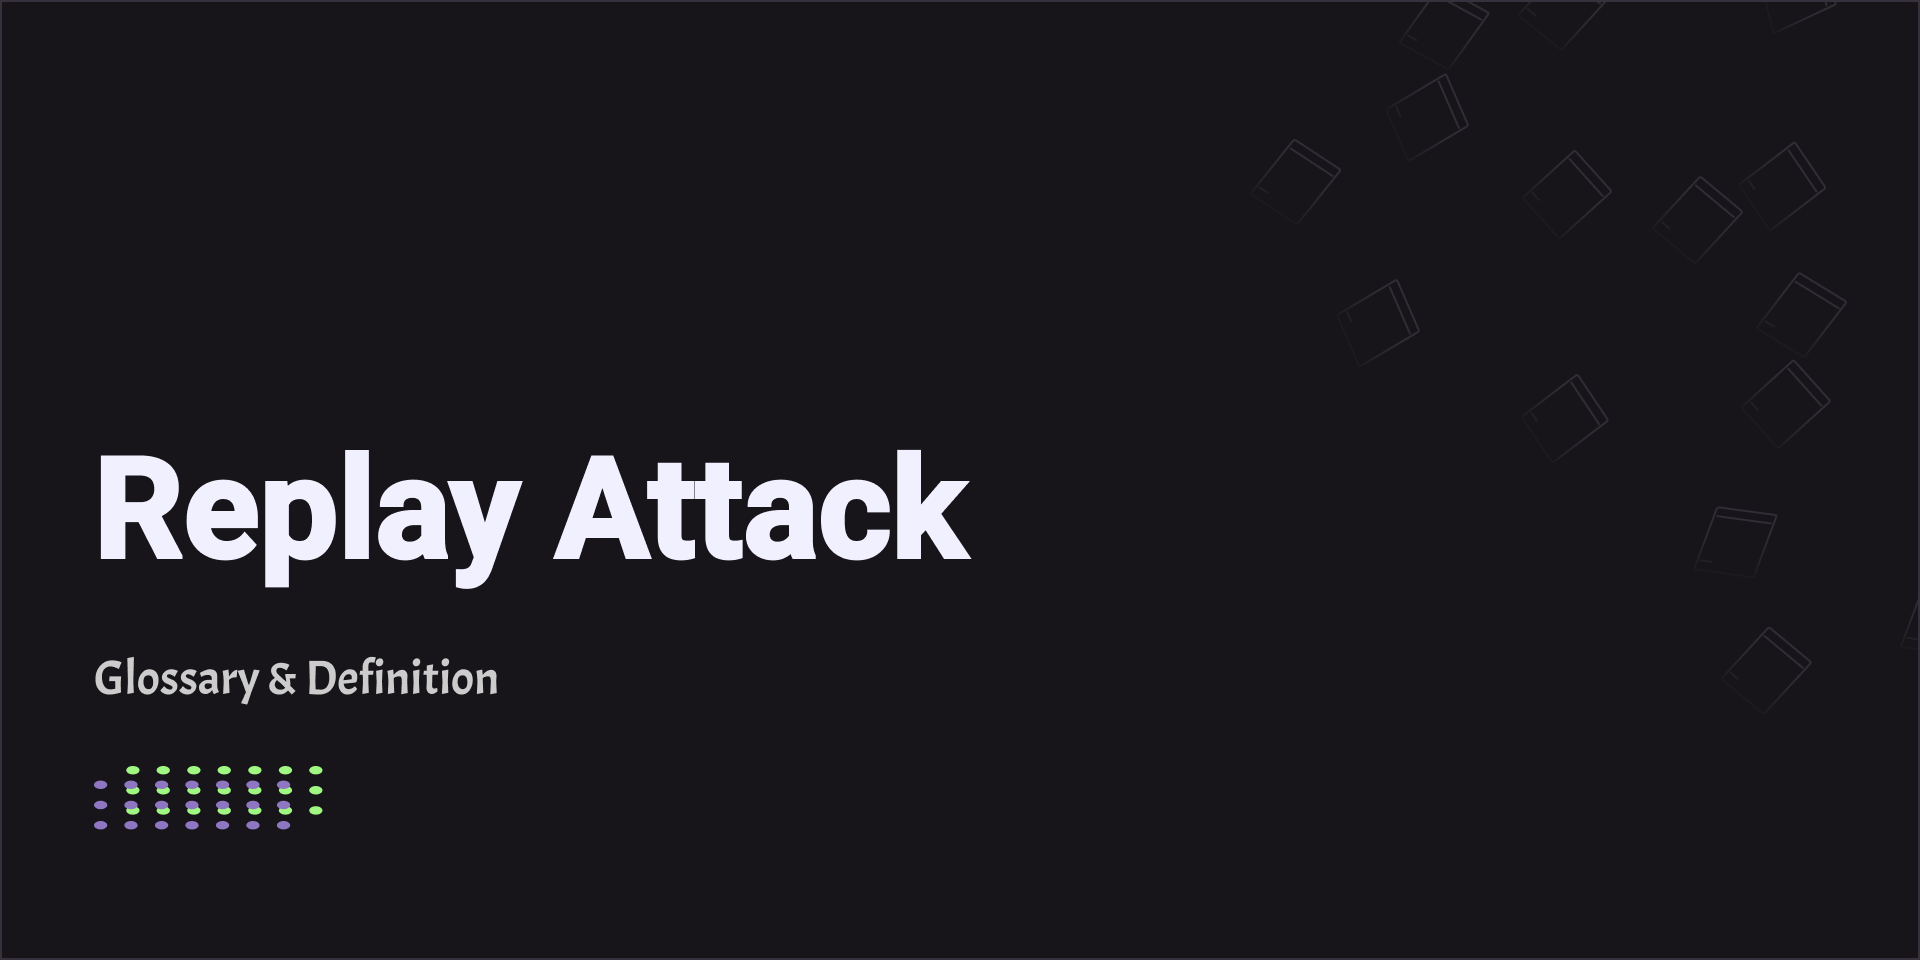 Replay Attack